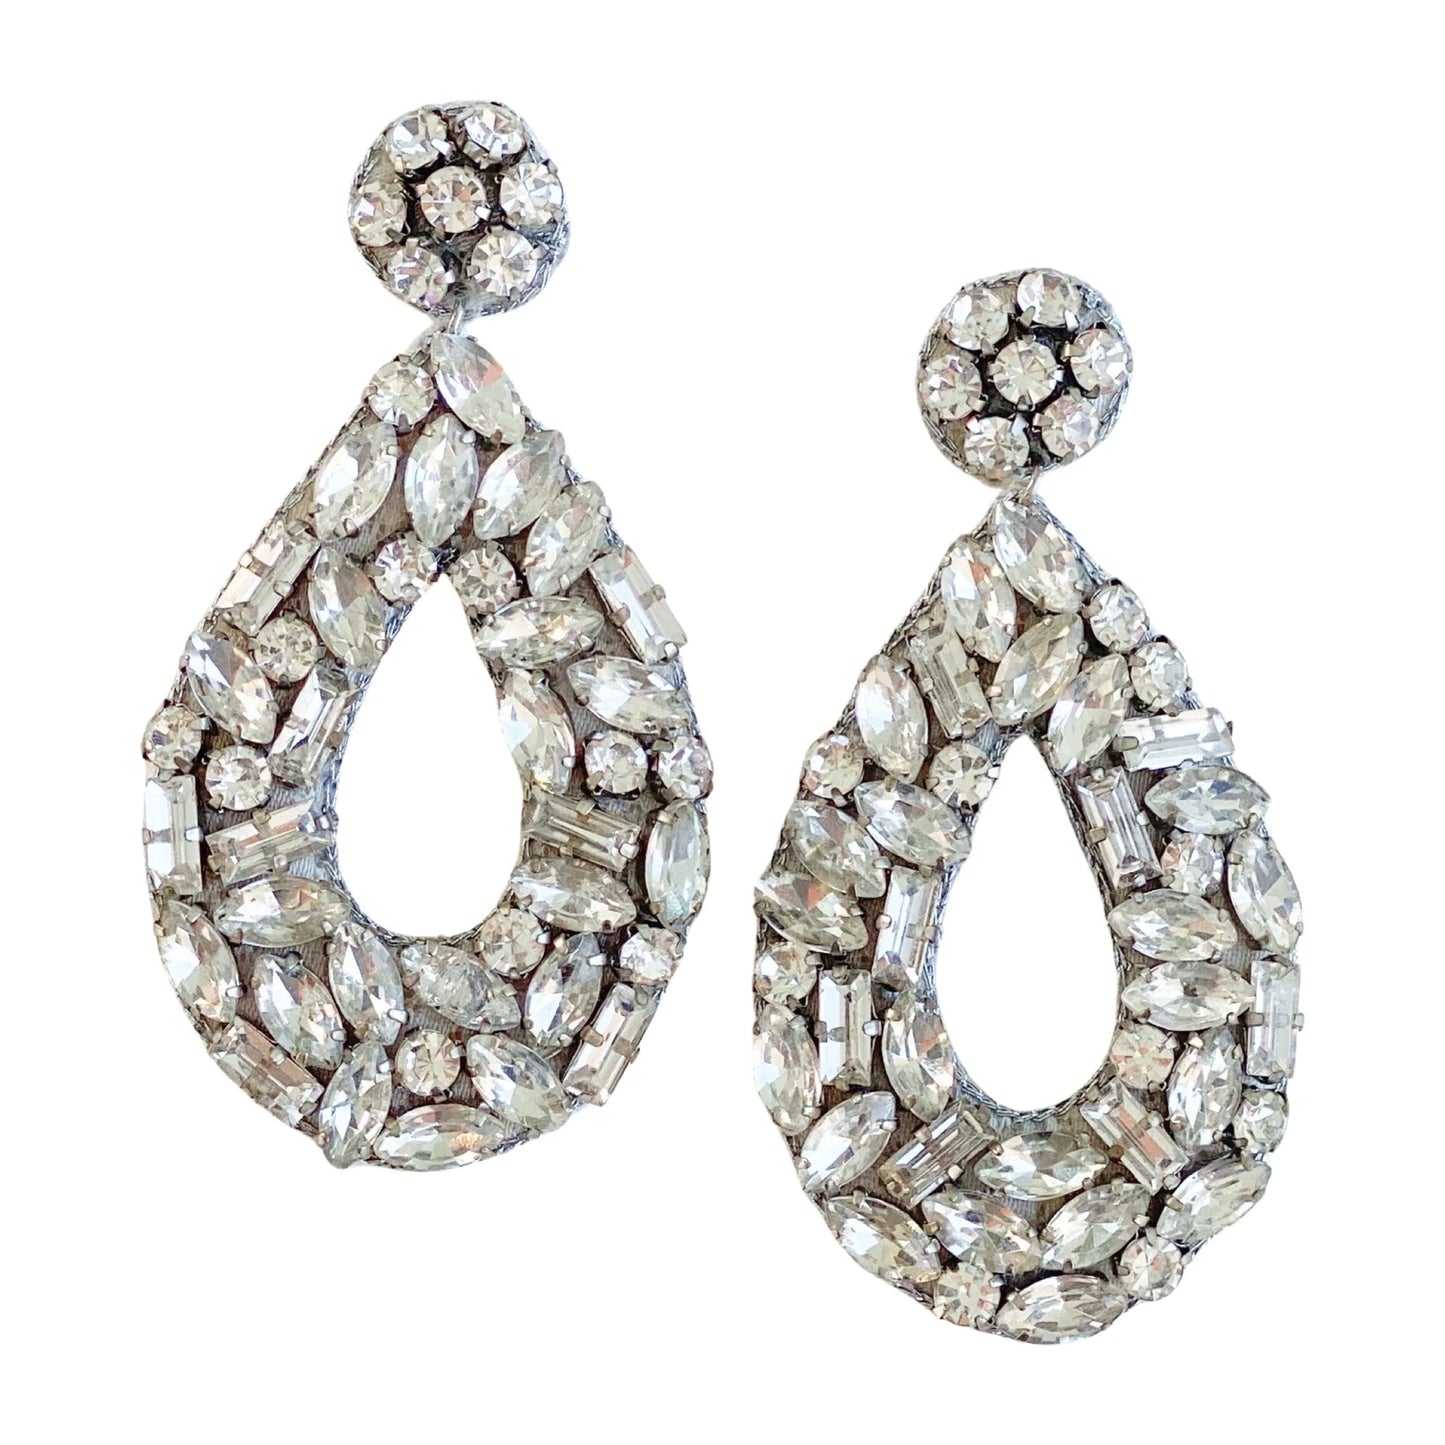 Elevate your look with the Juliet Earrings. These earrings feature glistening glass stones expertly cut into different shapes. The stones reflect the light, creating a captivating visual symphony.  They make a timeless and elegant addition to any outfit!